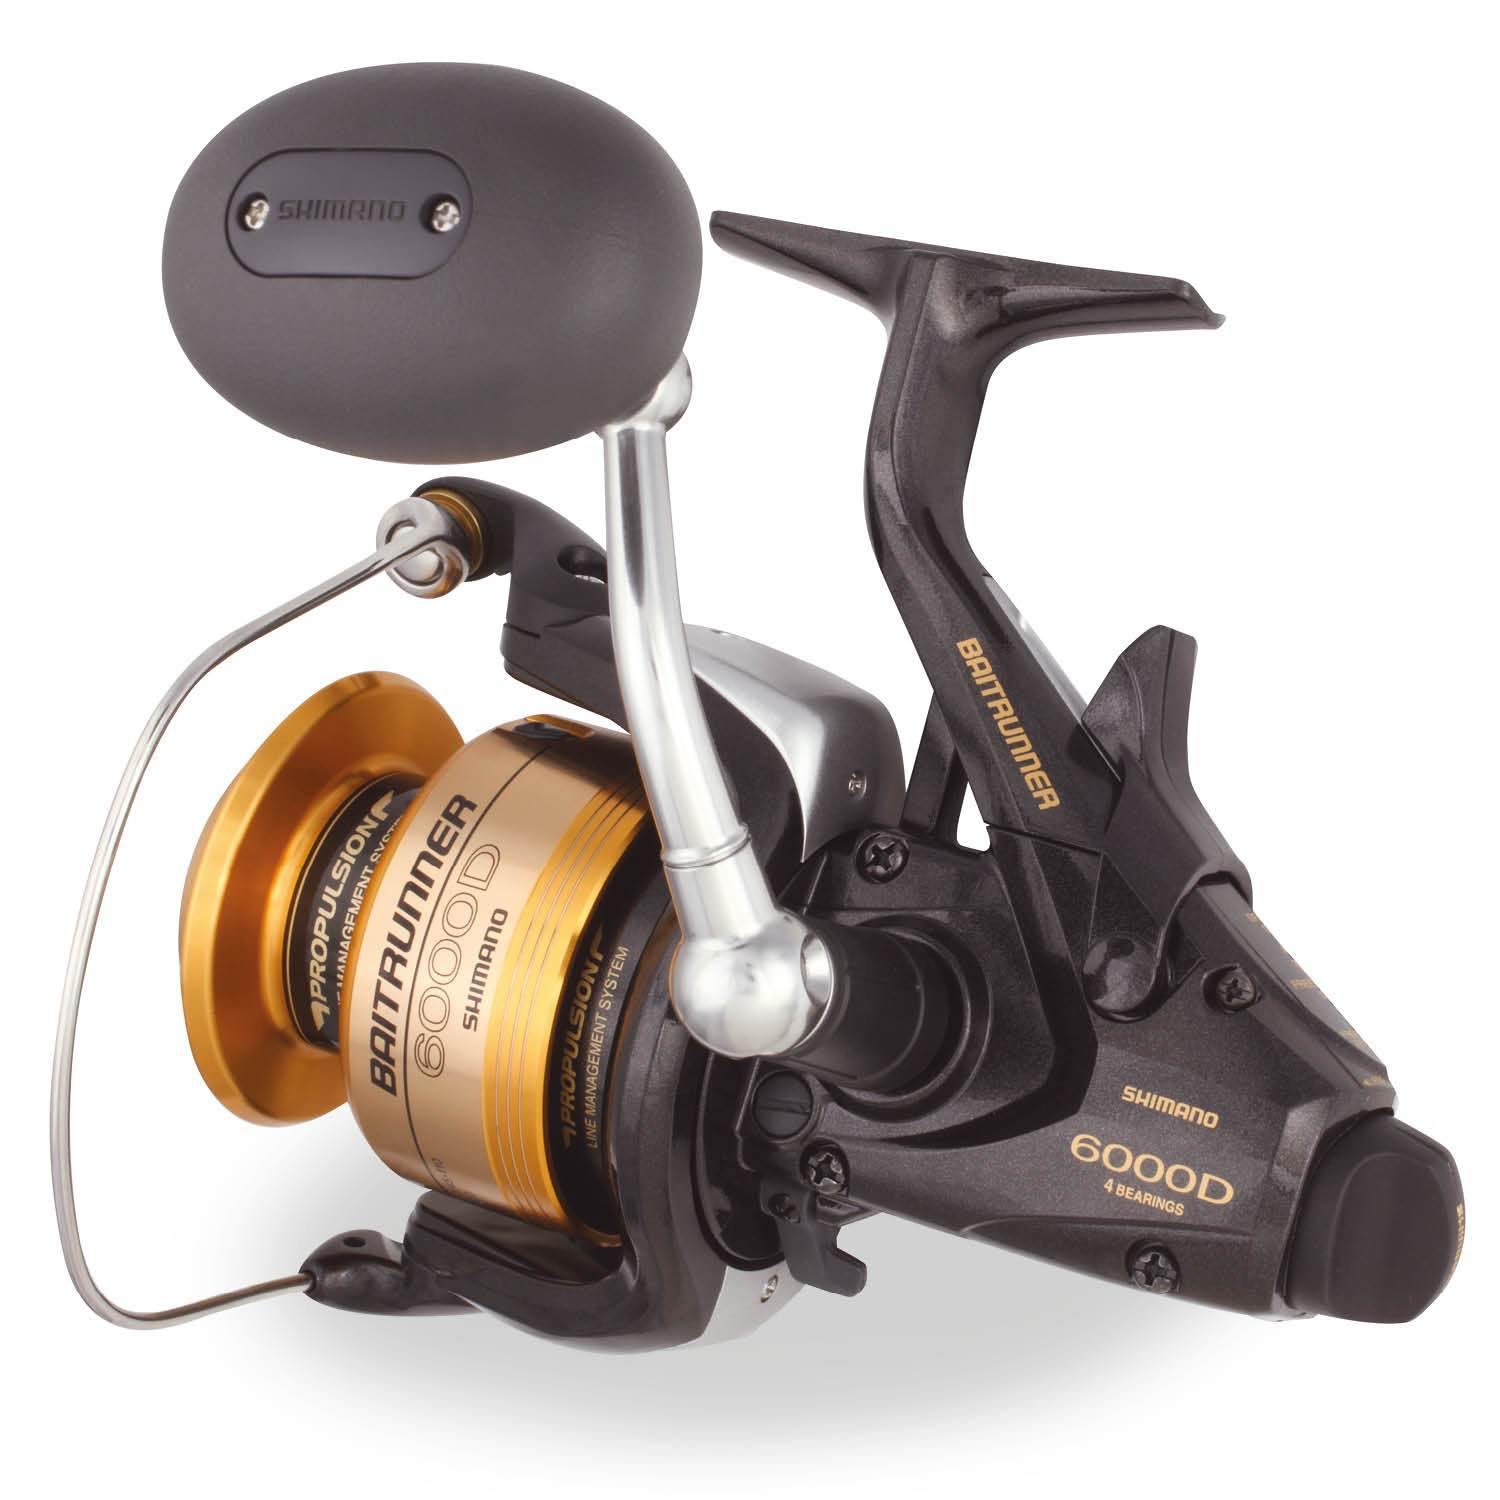 Hottest Baitfeeder Reel on the Water